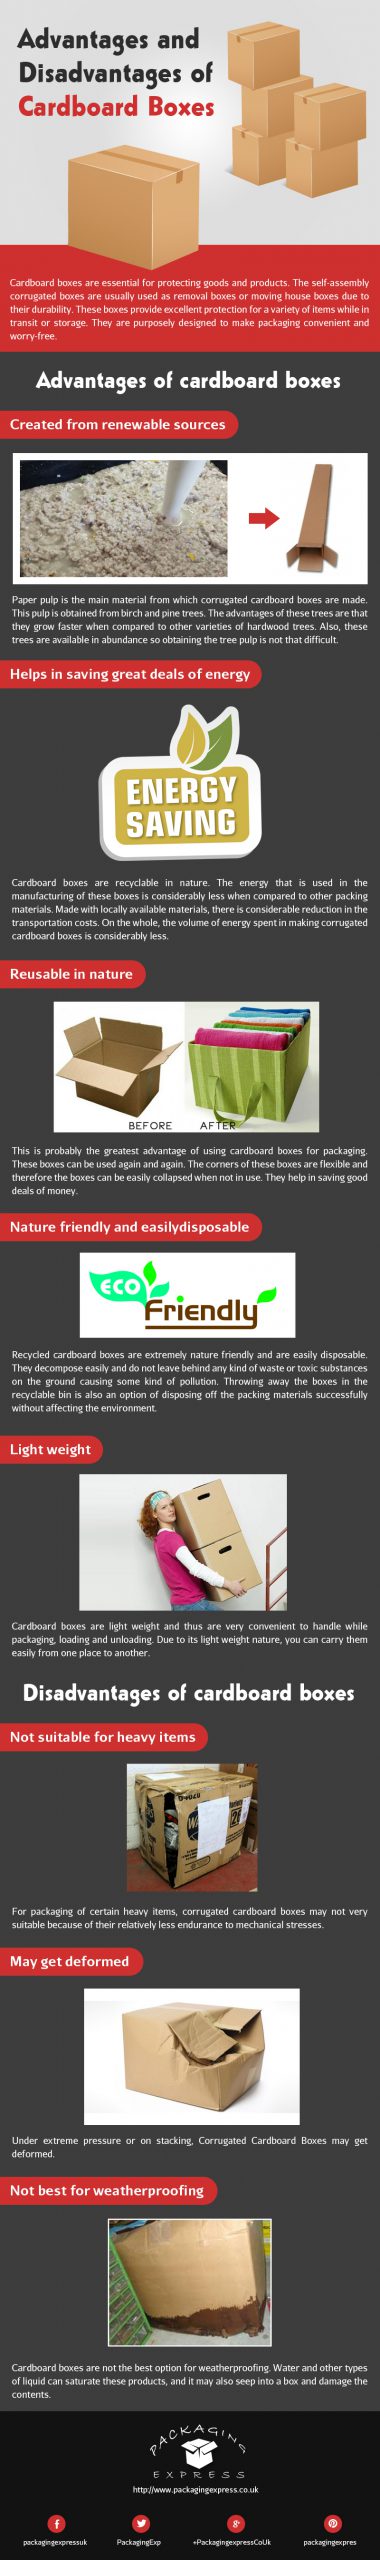 cardboard-boxes-infographic